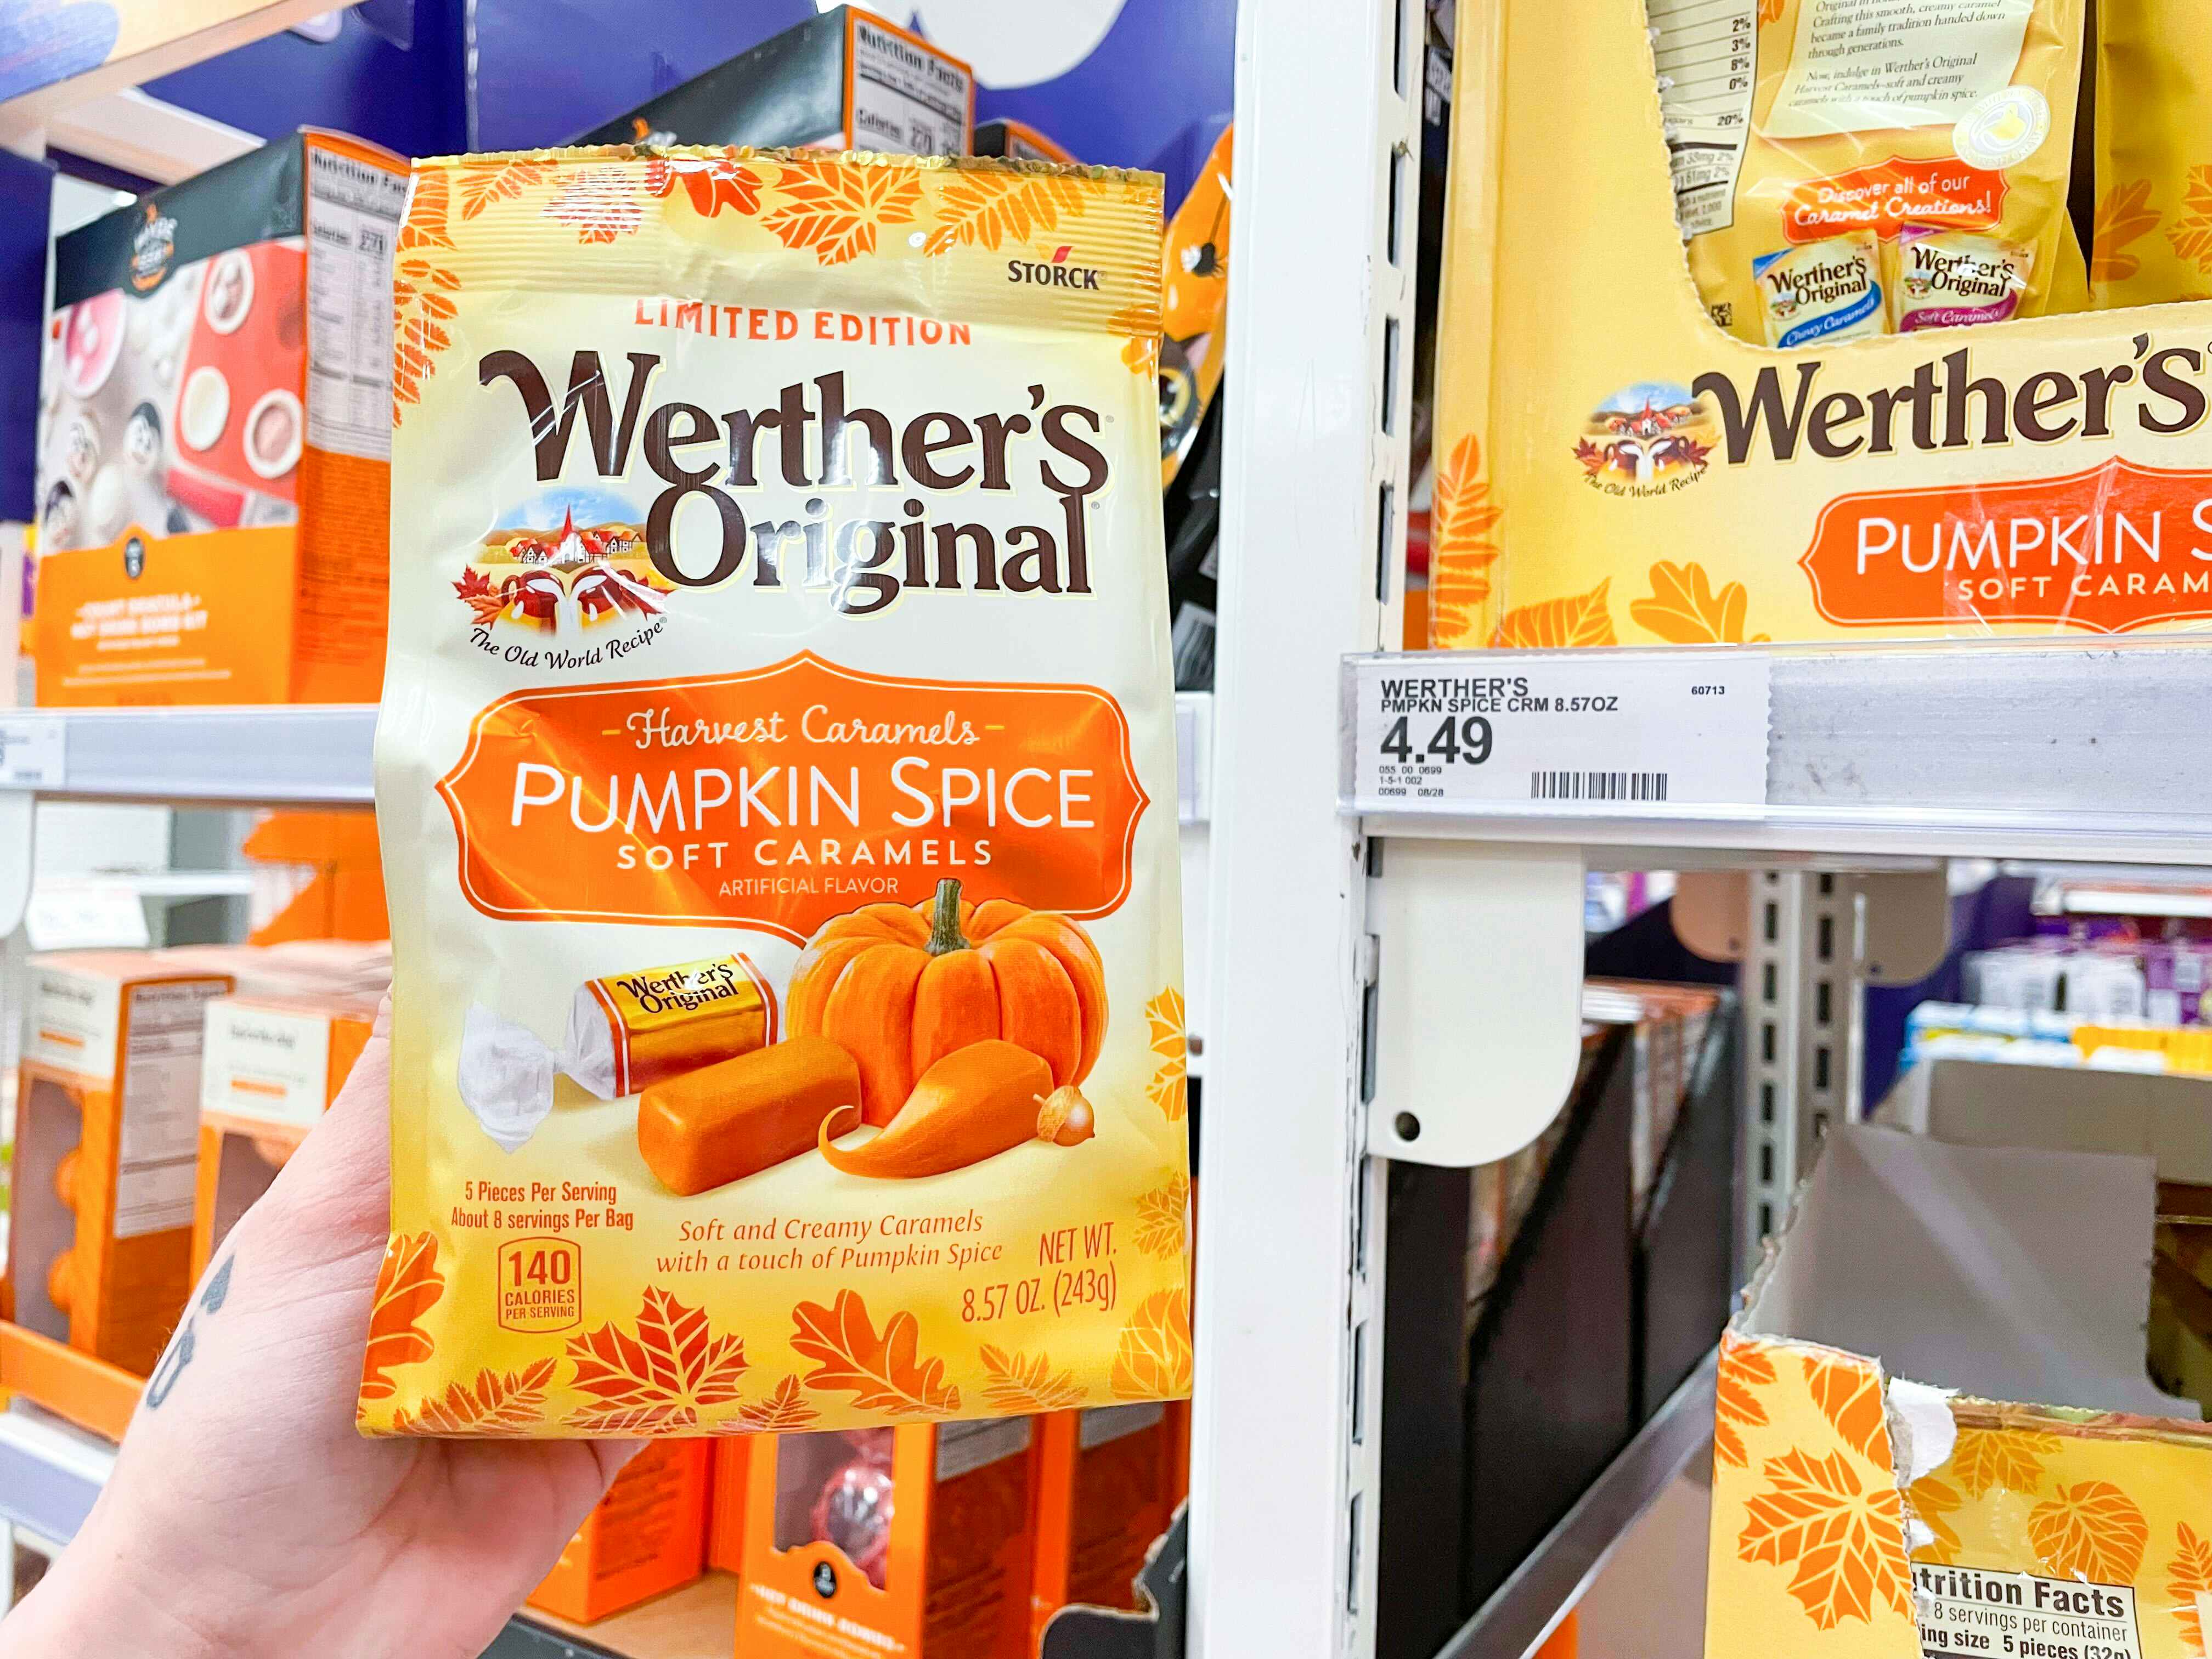 hand holding pumpkin spice caramels next to price tag